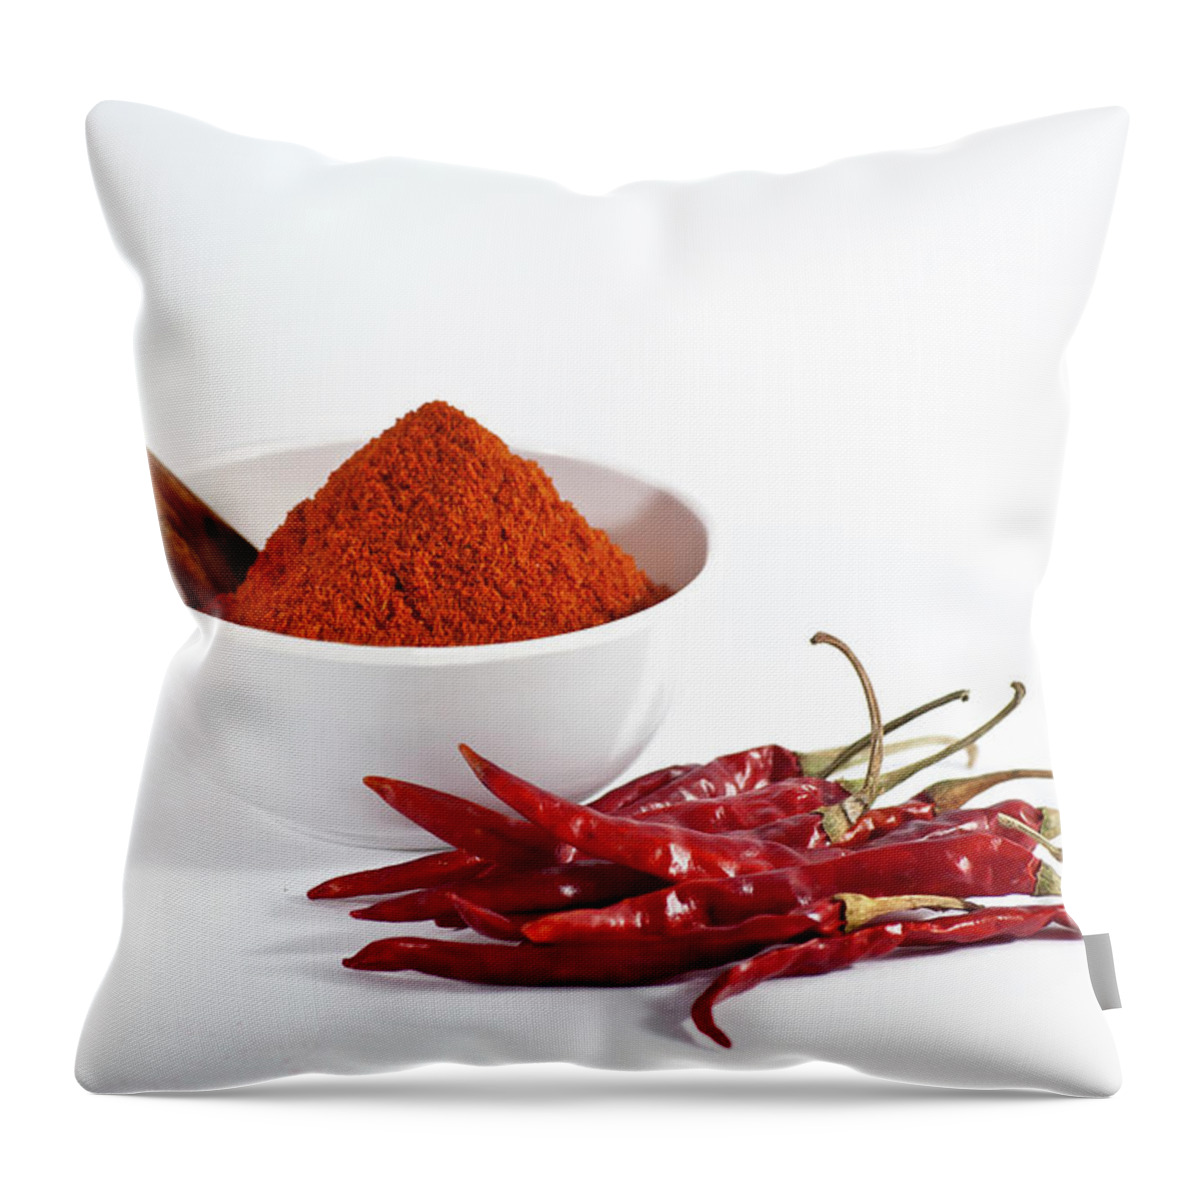 White Background Throw Pillow featuring the photograph Chili Powder And Red Chilies by Subir Basak